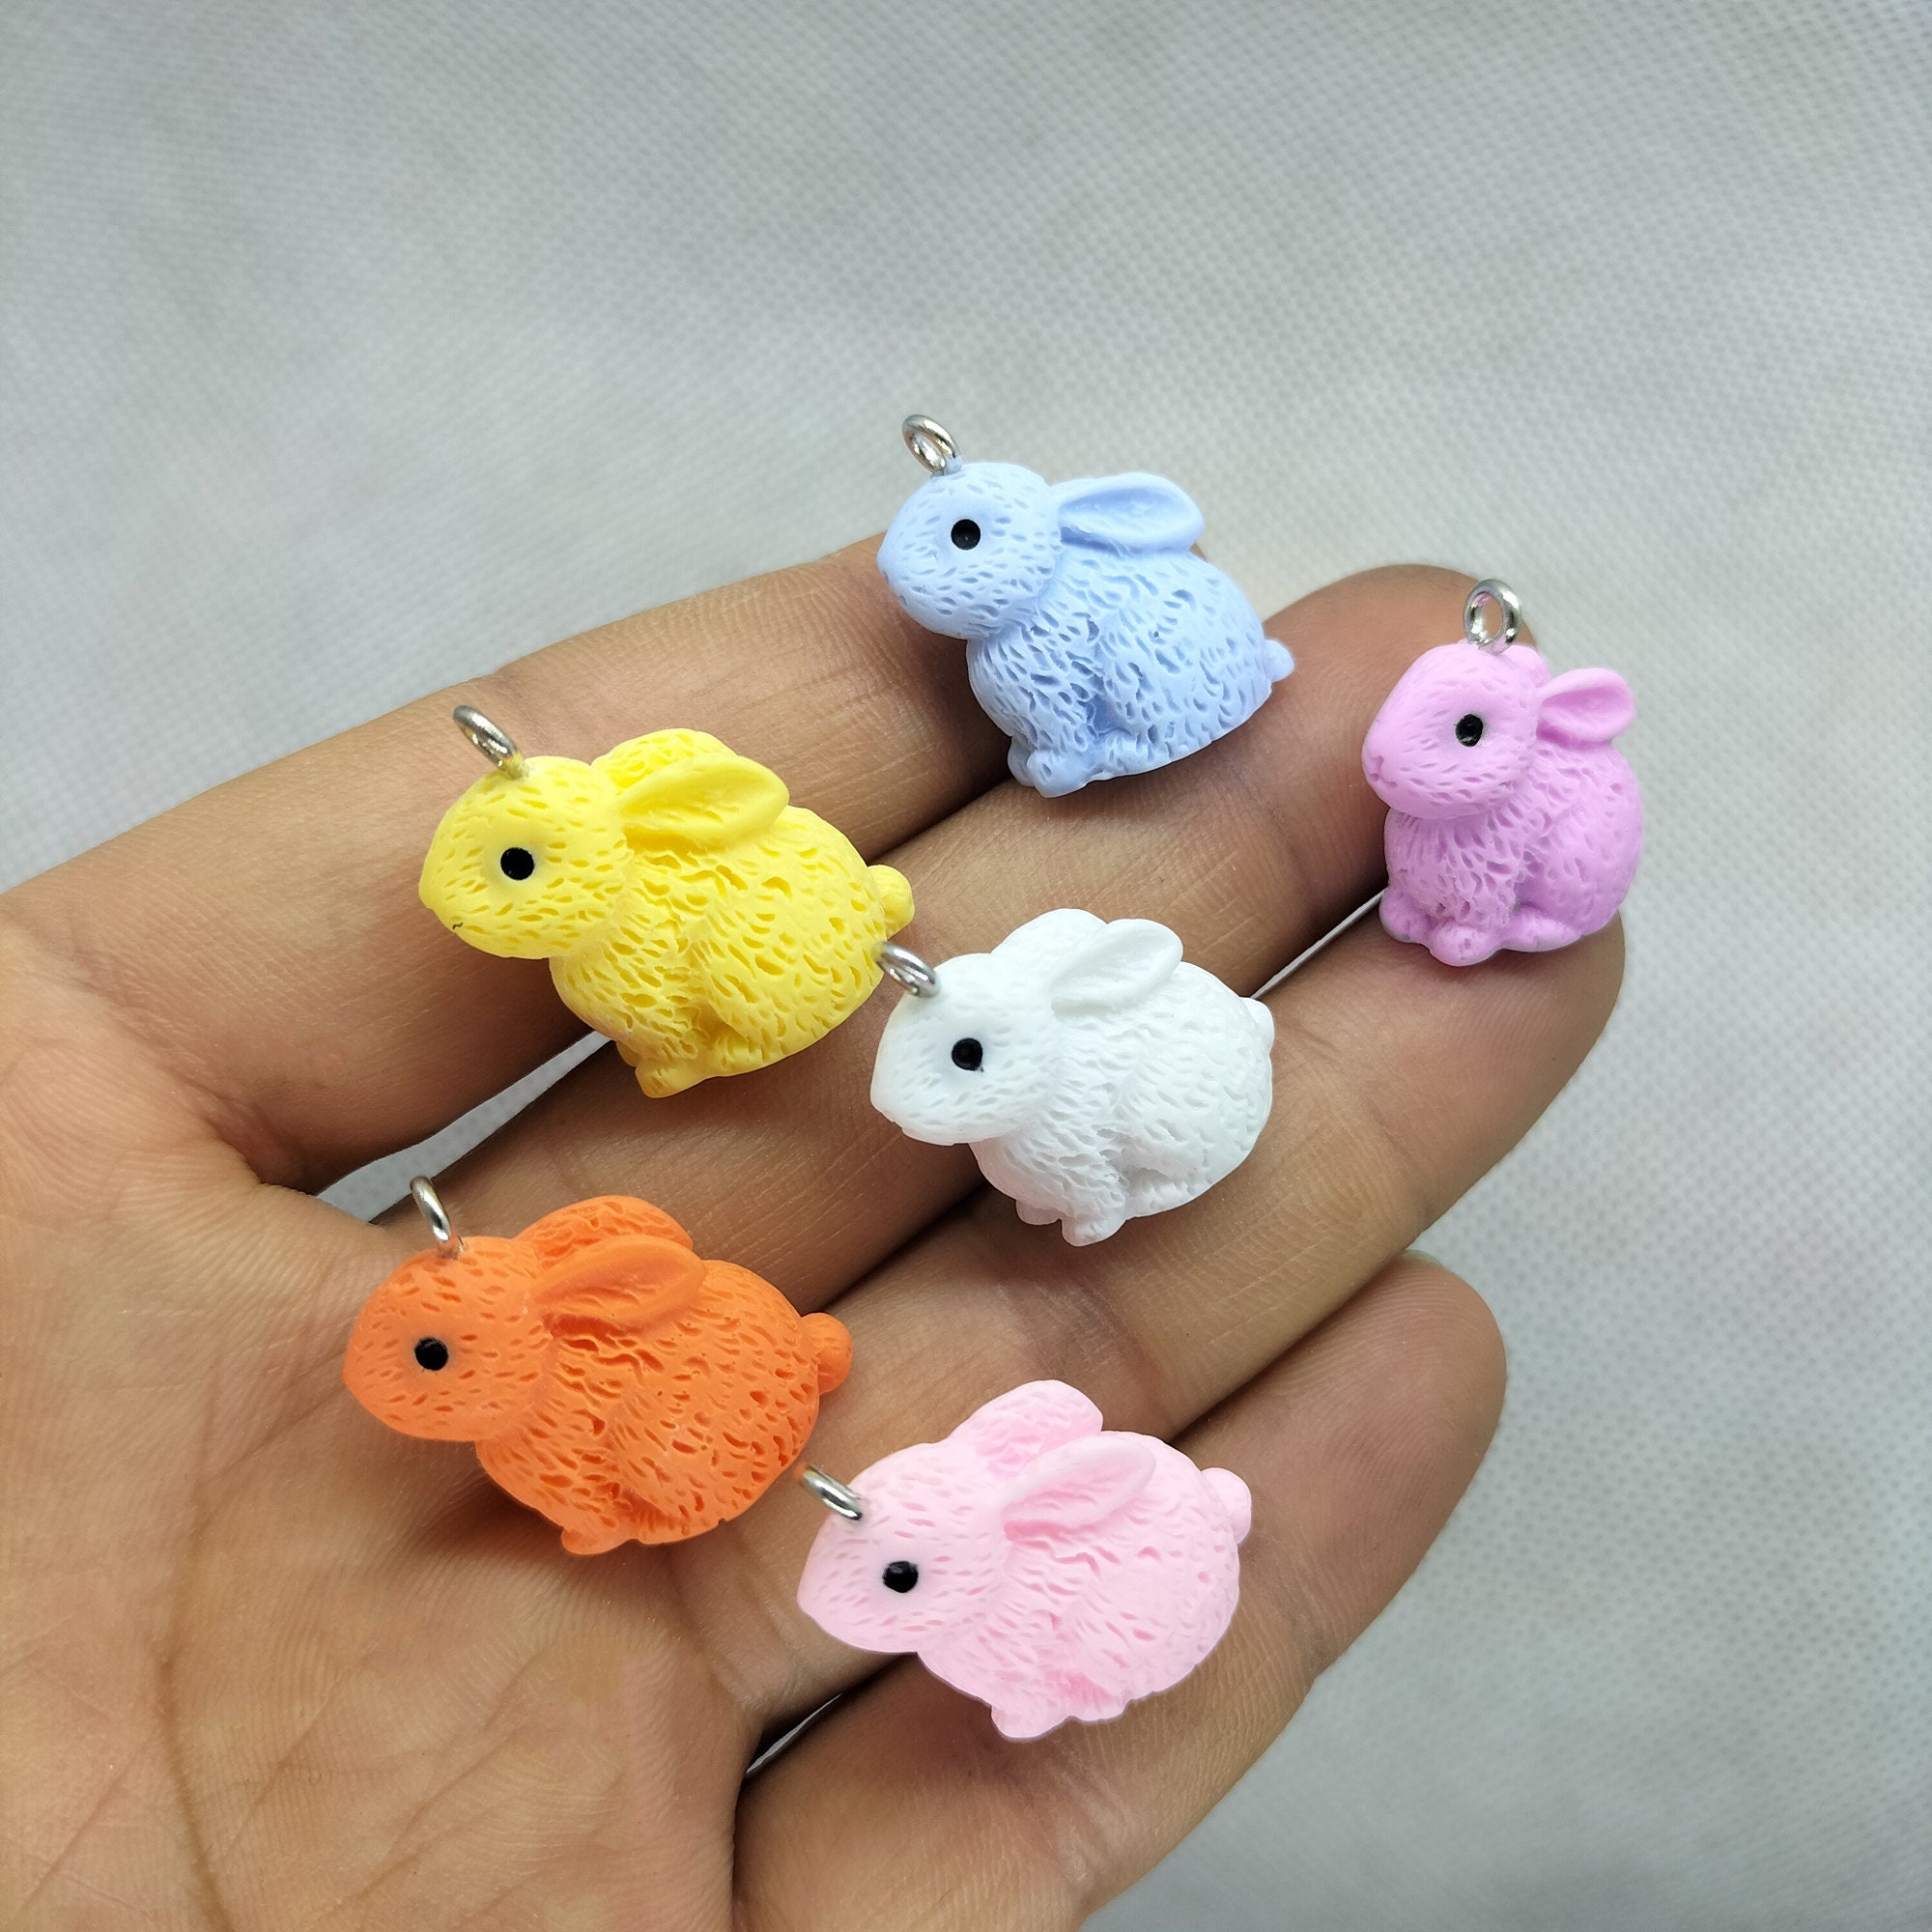 jojofuny 24pcs Easter Charms, Easter Egg Necklace, Rabbit Pendant Charms,  for Necklace Bracelet Jewelry Making DIY Crafts Holiday Accessory